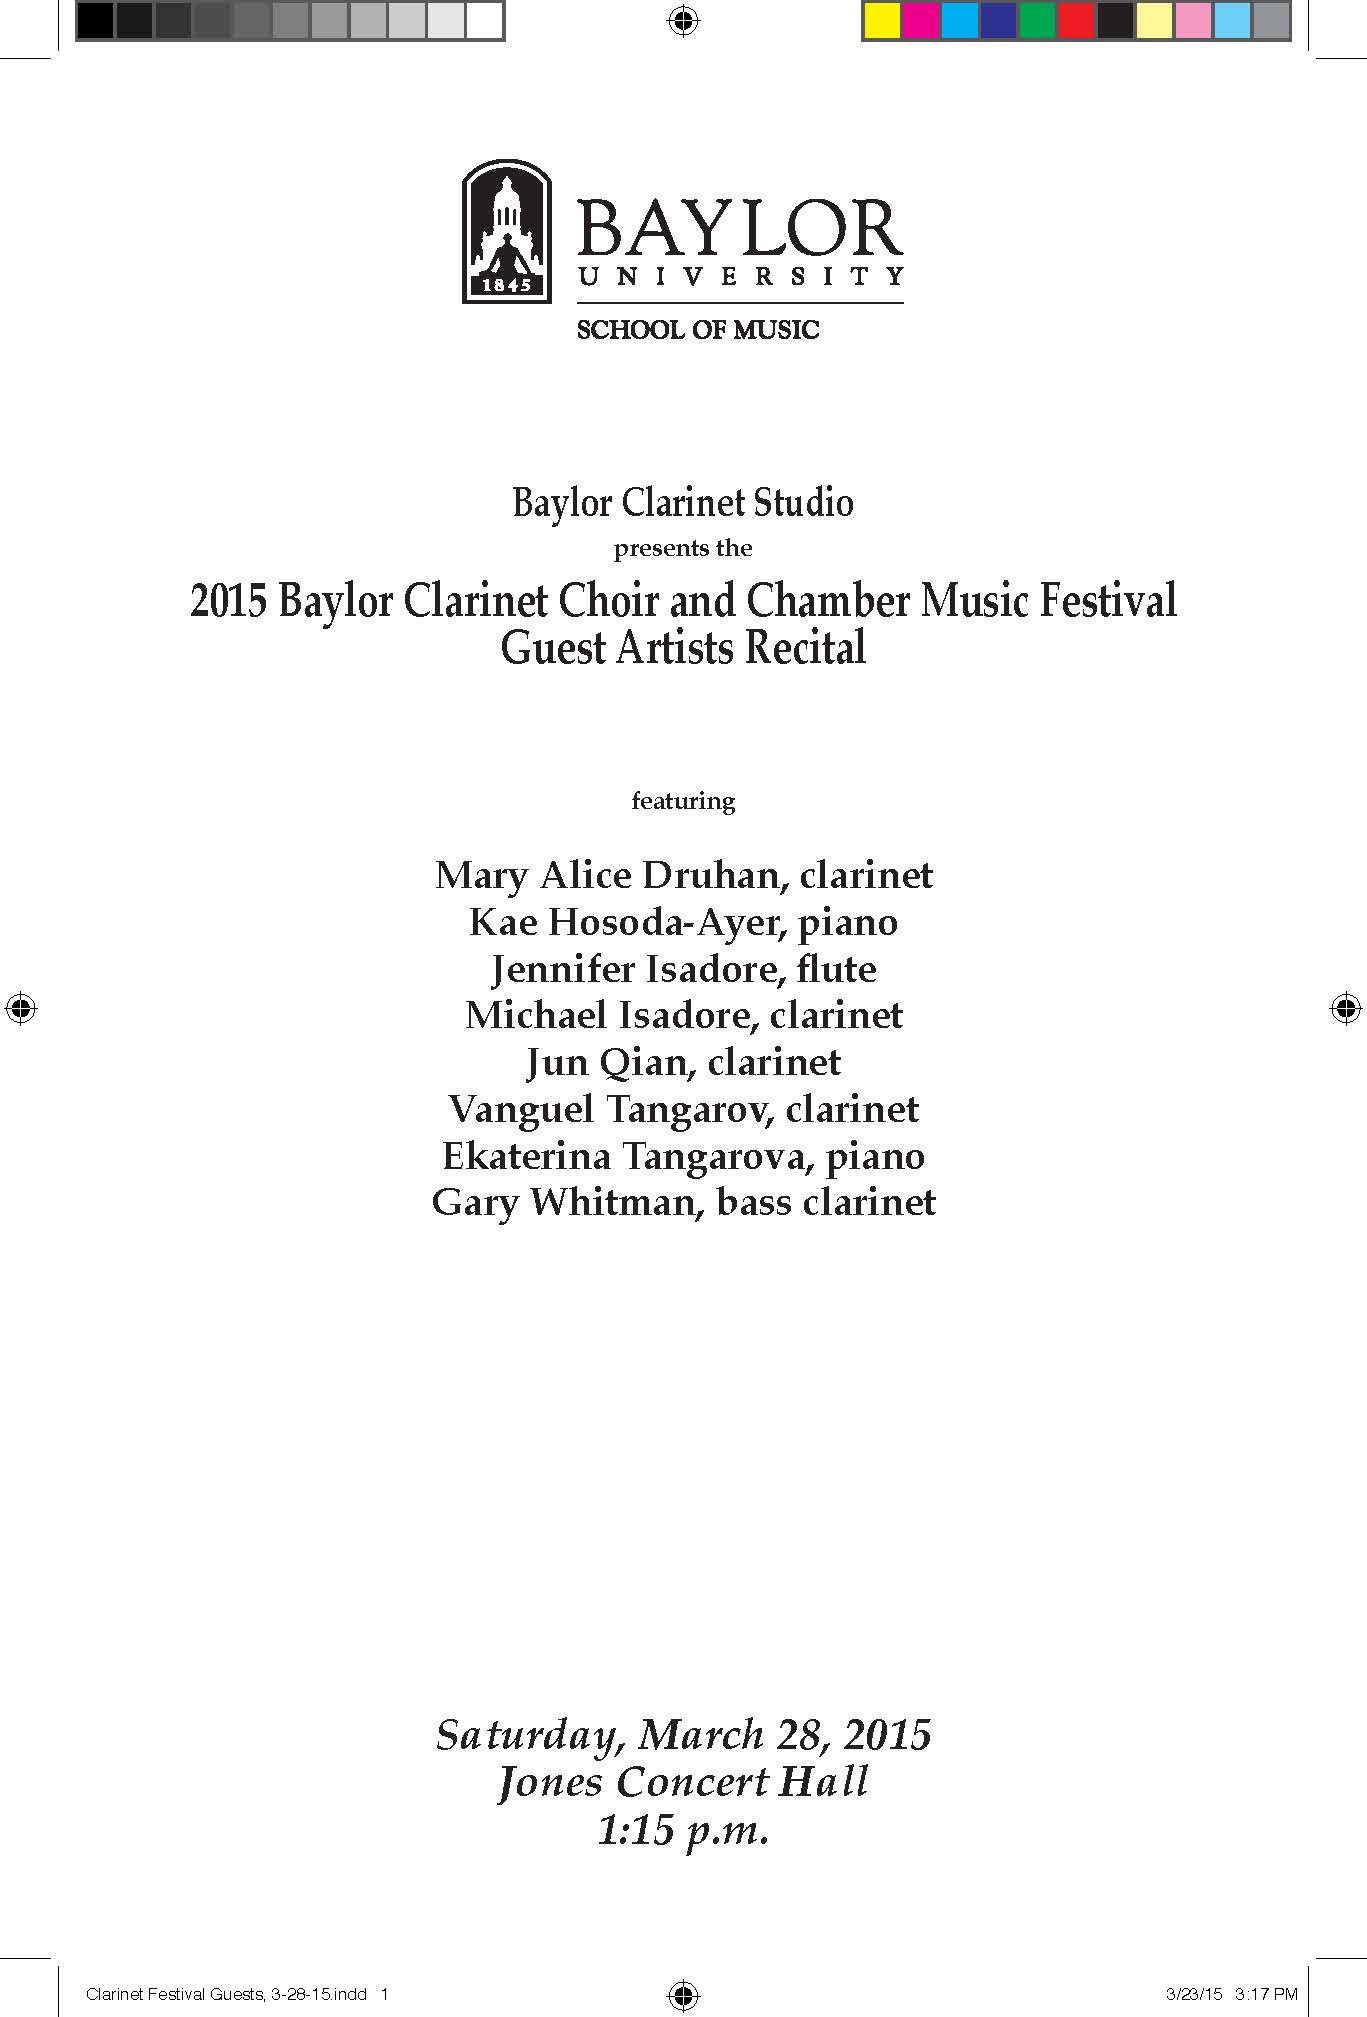 Clarinet Festival Guests, 3-28-15_Page_1